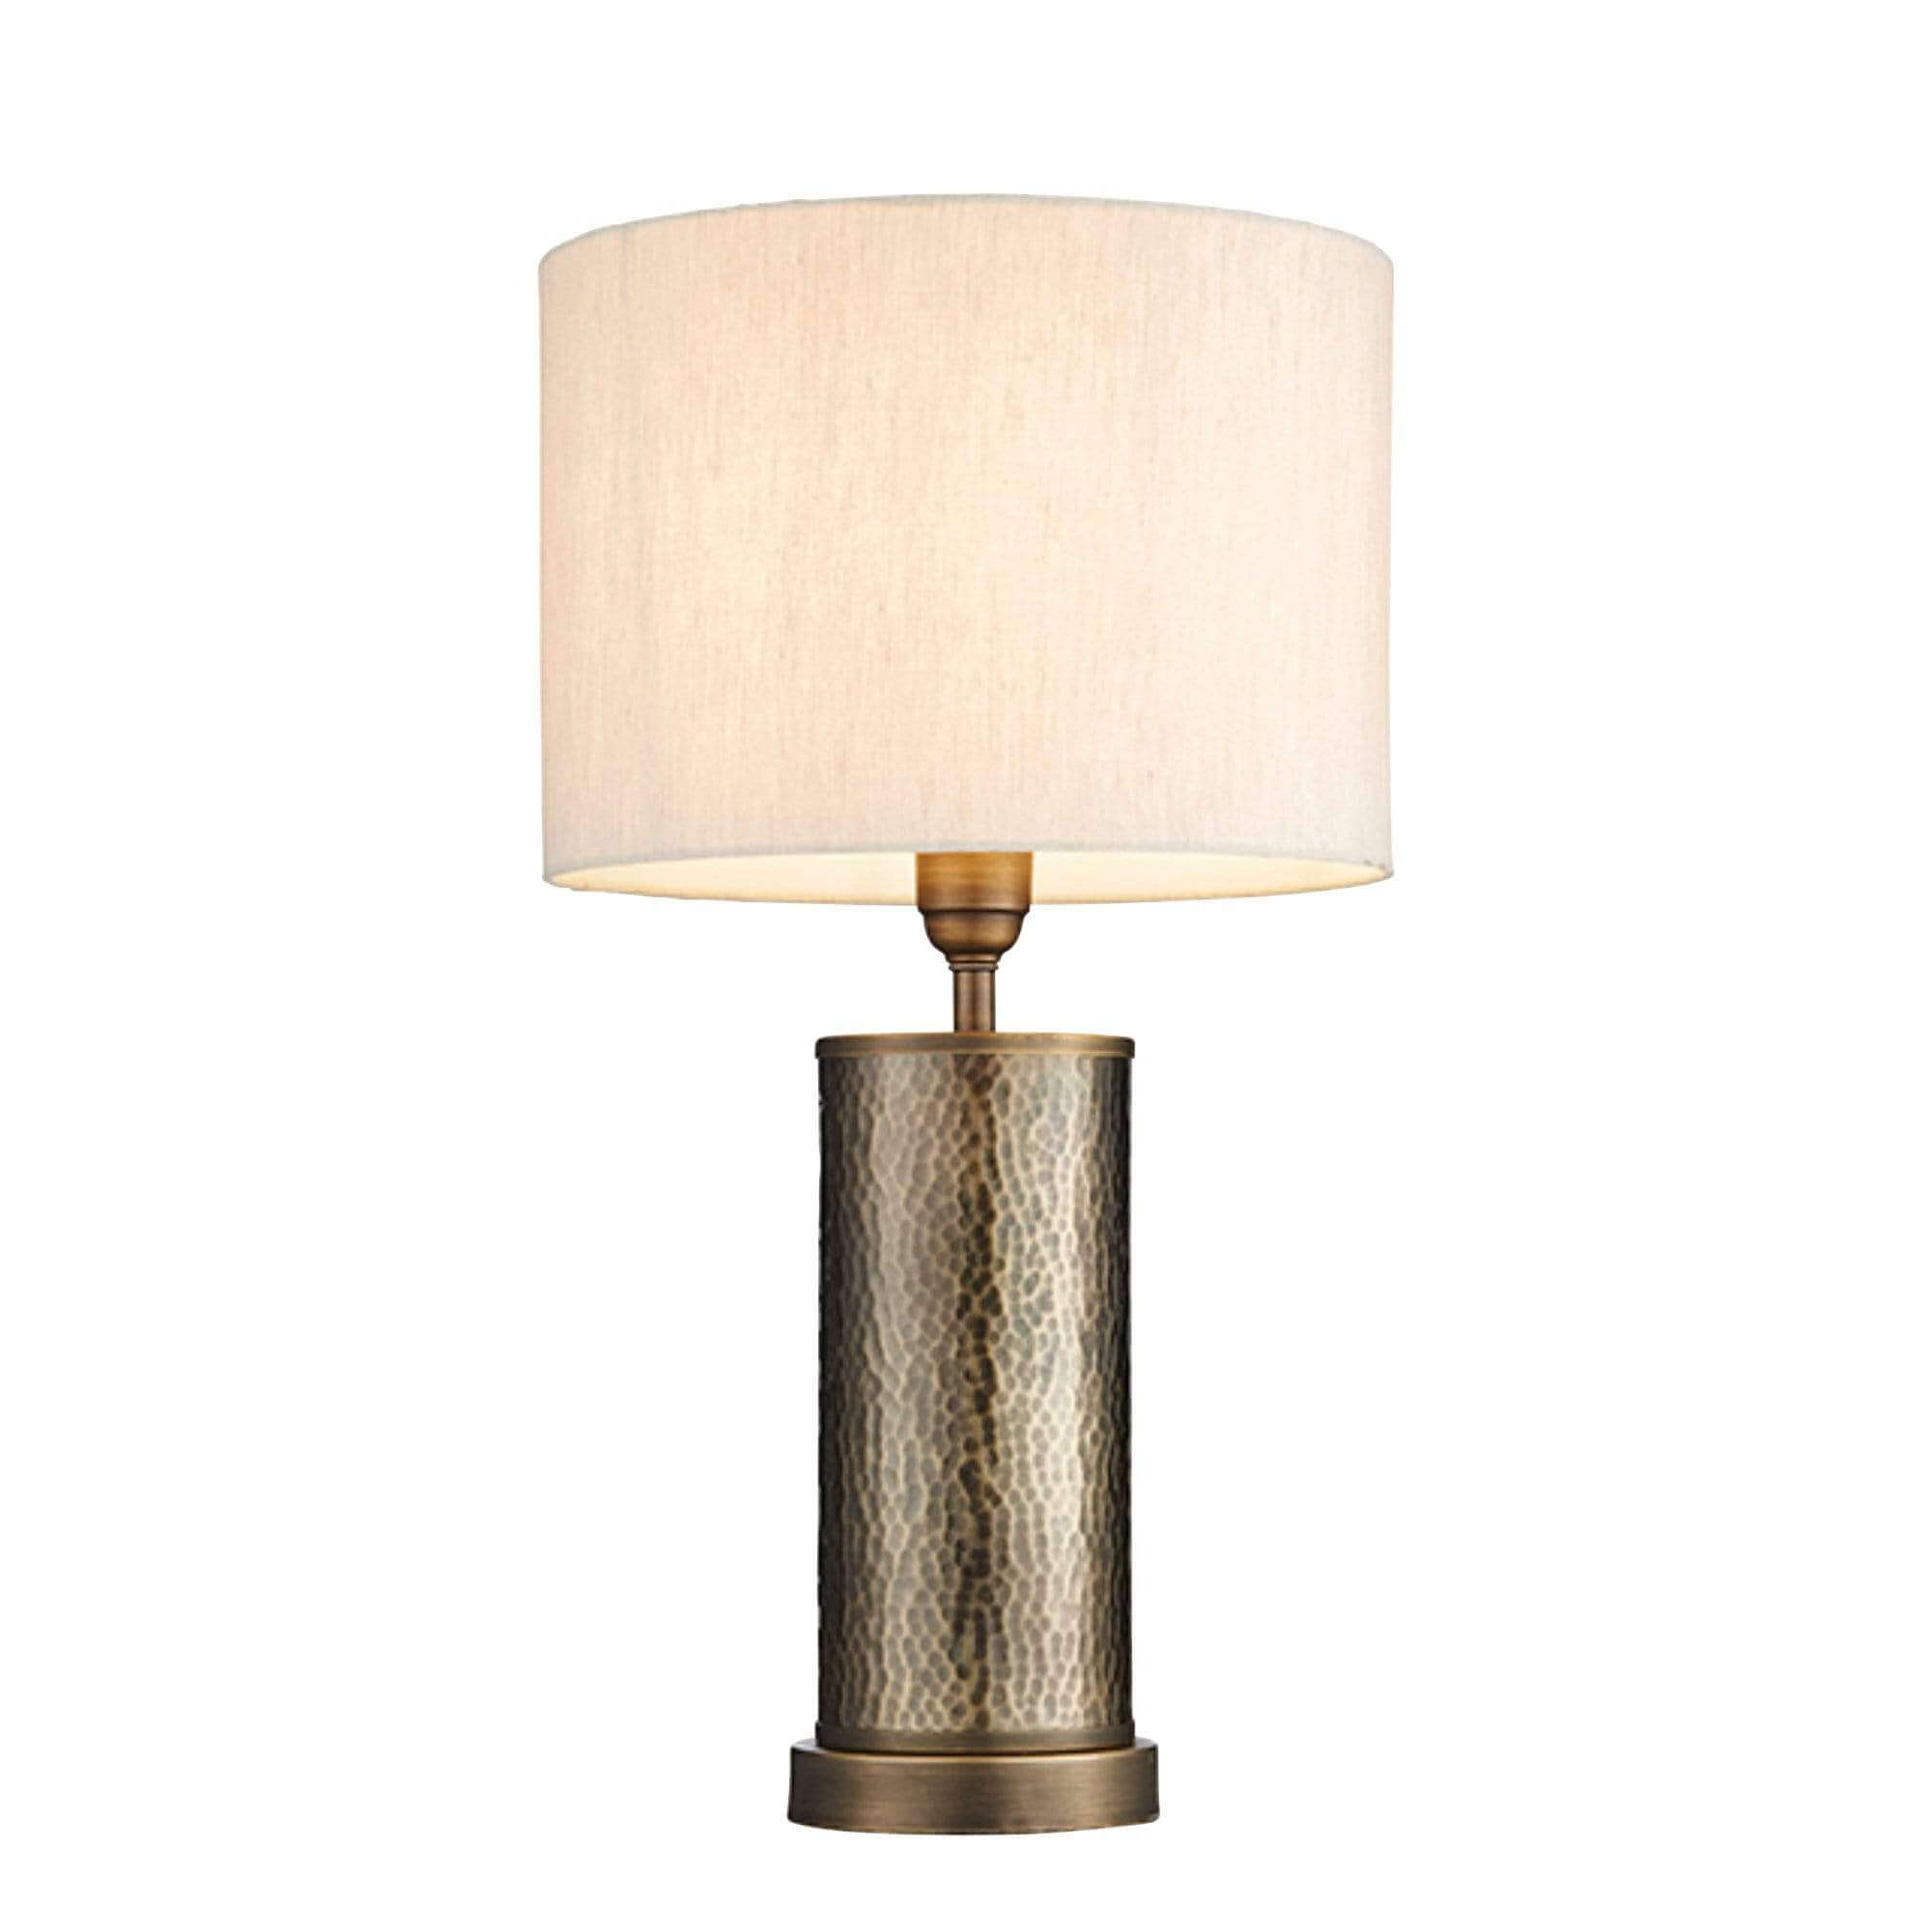 Peened Antique Bronze Column Table Lamp With Shade - escapologyhome.co.uk